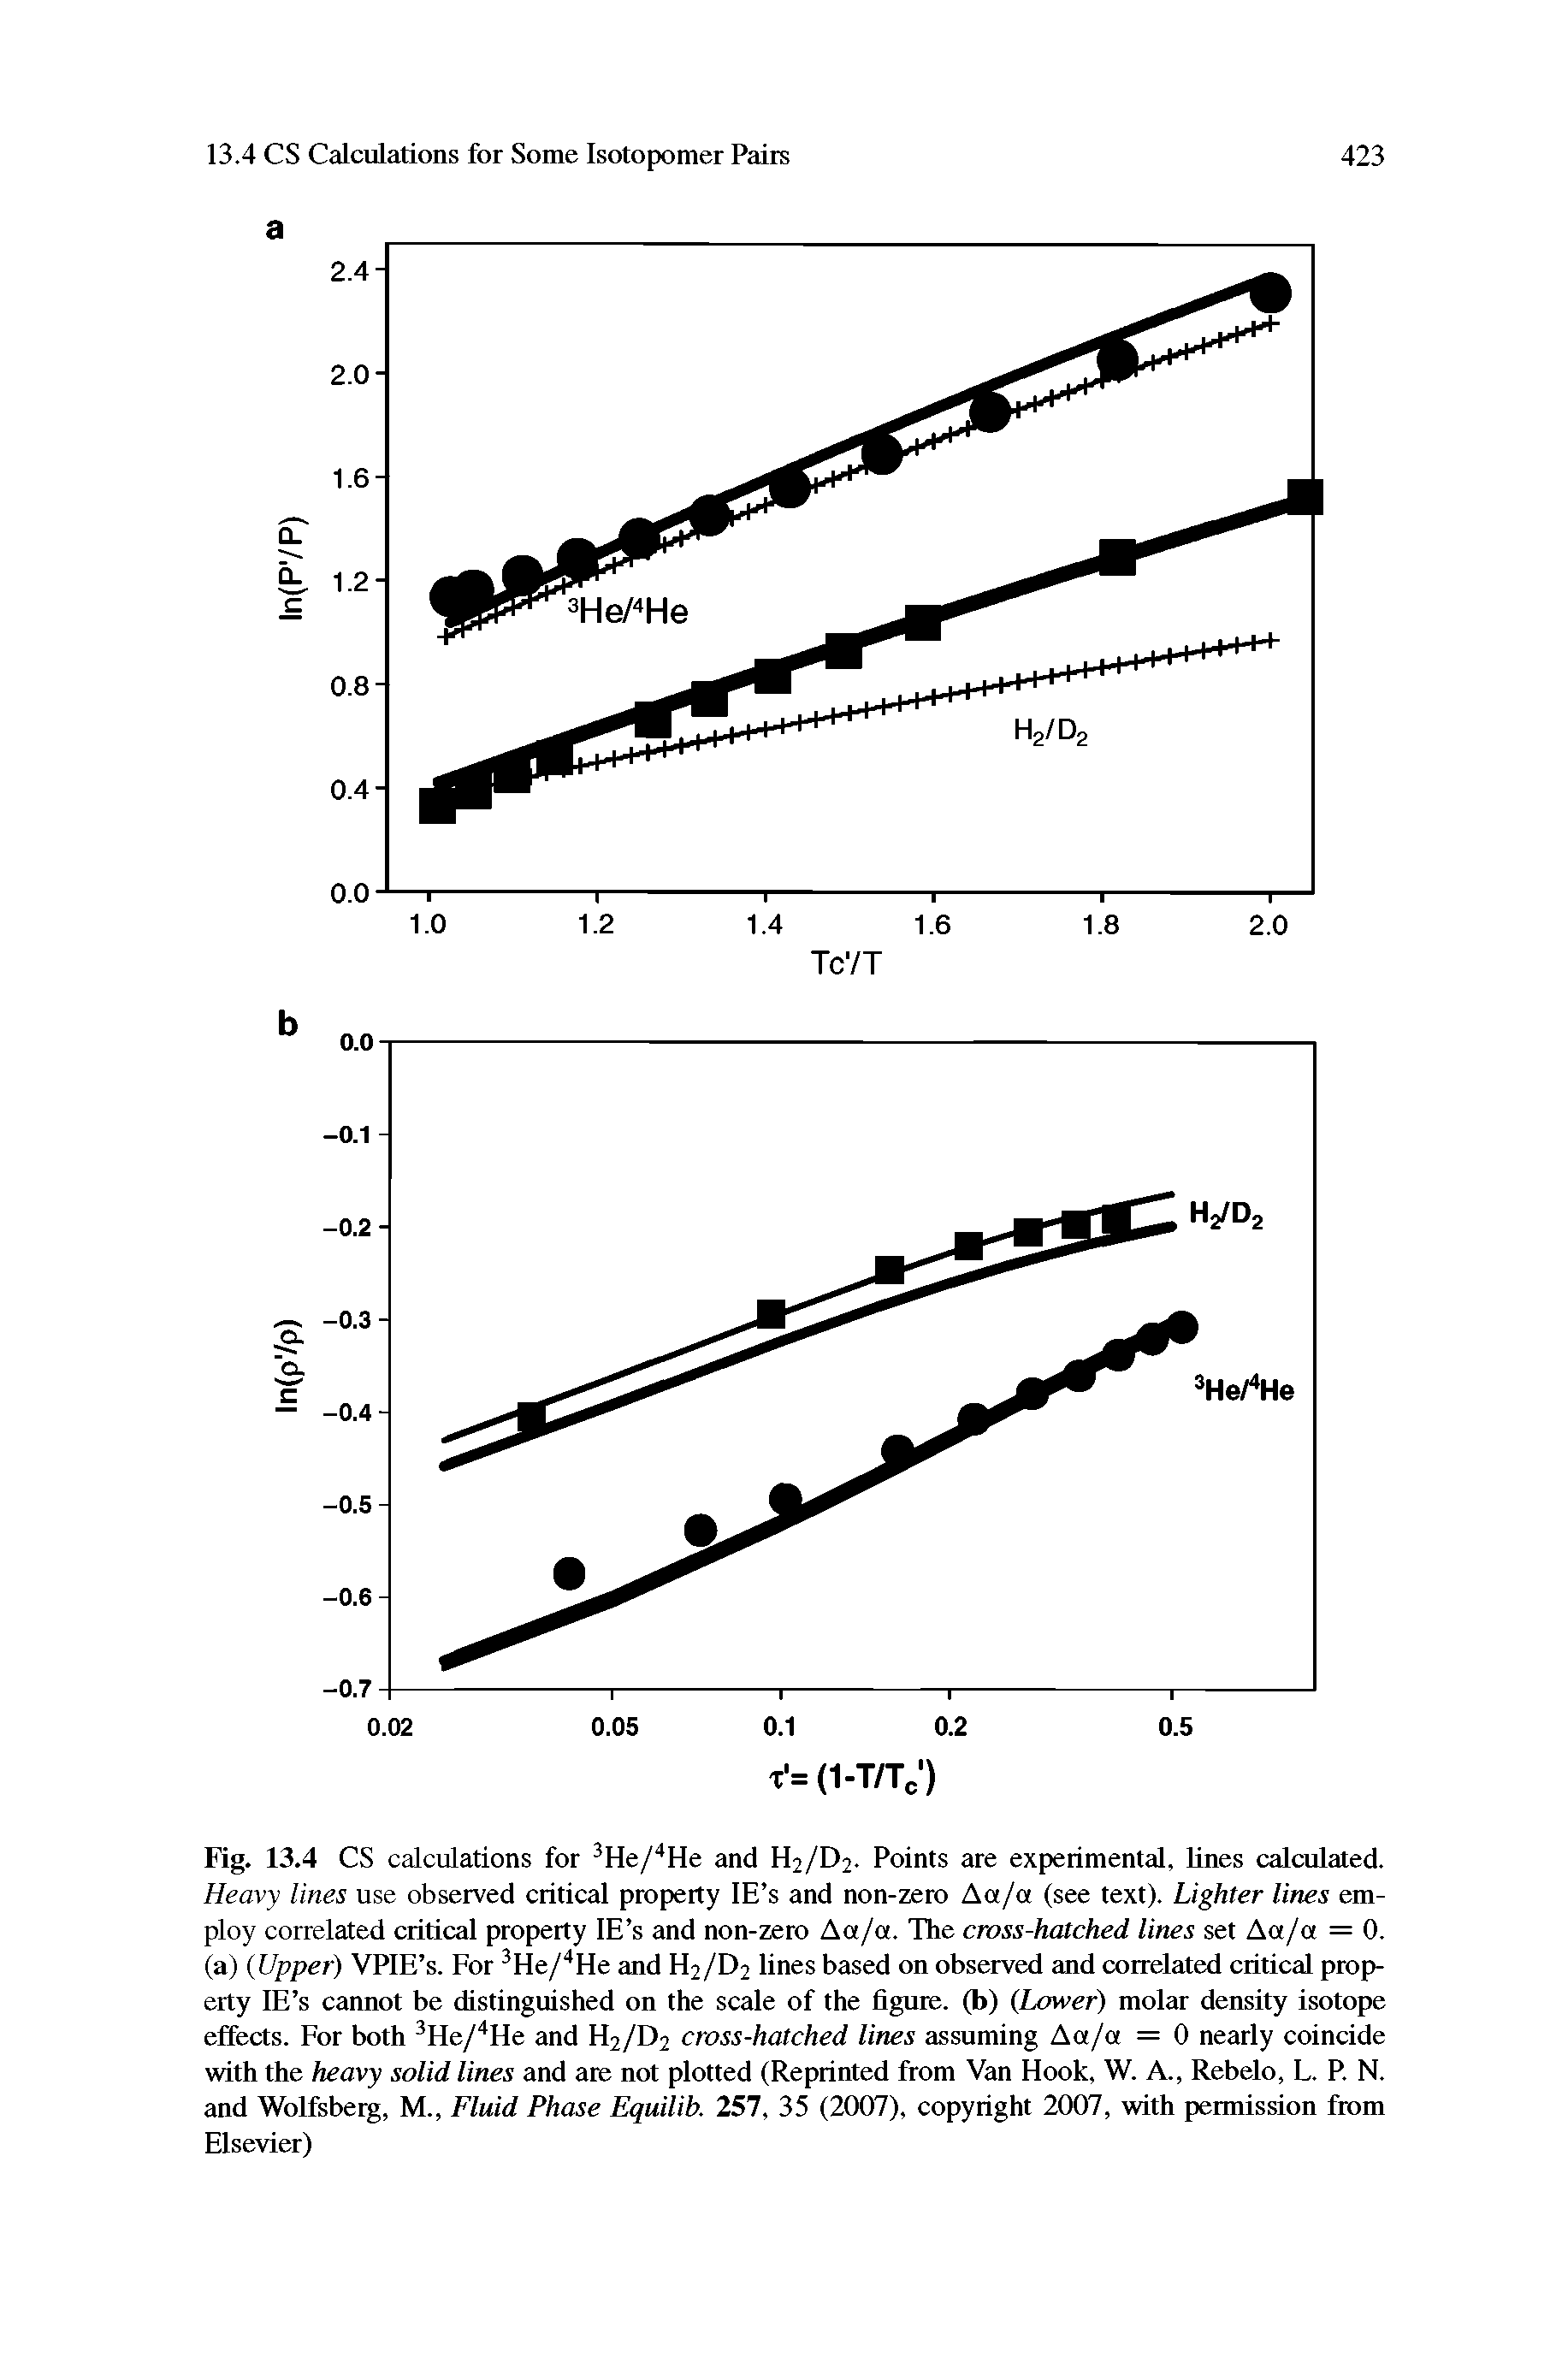 Fig. 13.4 CS calculations for 3He/4He and H2/D2. Points are experimental, lines calculated. Heavy lines use observed critical property IE s and non-zero Aa/a (see text). Lighter lines employ correlated critical property IE s and non-zero Aa/a. The cross-hatched lines set Aa/a = 0. (a) (Upper) VPIE s. For 3He/4He and H2/D2 lines based on observed and correlated critical property IE s cannot be distinguished on the scale of the figure, (b) (Lower) molar density isotope effects. For both 3He/4He and H2/D2 cross-hatched lines assuming Aa/a = 0 nearly coincide with the heavy solid lines and are not plotted (Reprinted from Van Hook, W. A., Rebelo, L. P. N. and Wolfsberg, M., Fluid Phase Equilib. 257, 35 (2007), copyright 2007, with permission from Elsevier)...